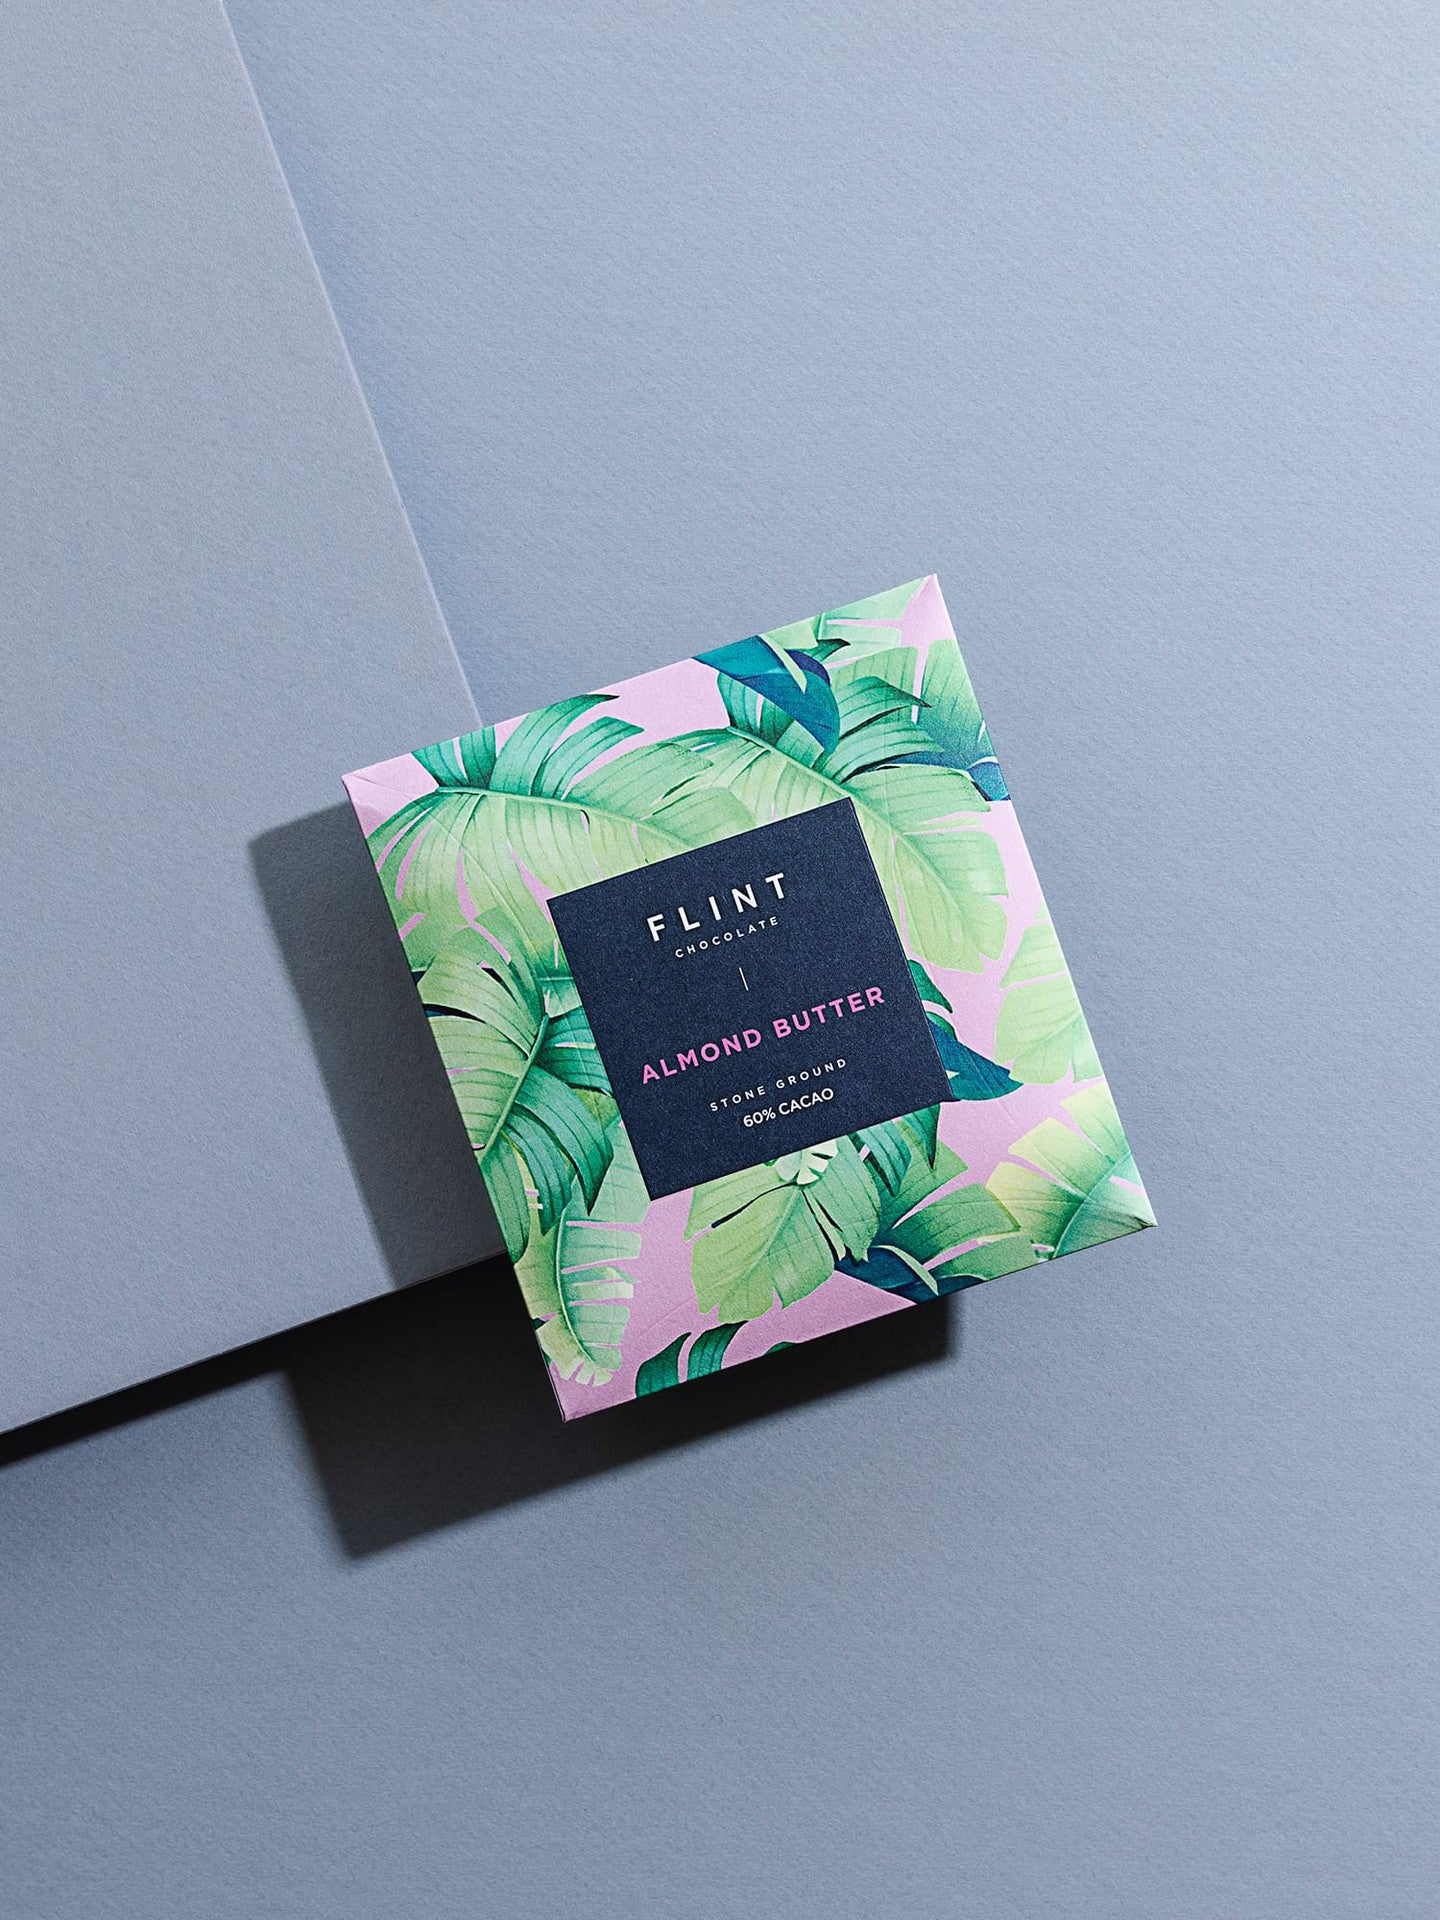 A Flint Chocolate Almond Butter Chocolate Bar with a pink and green leaf on it.